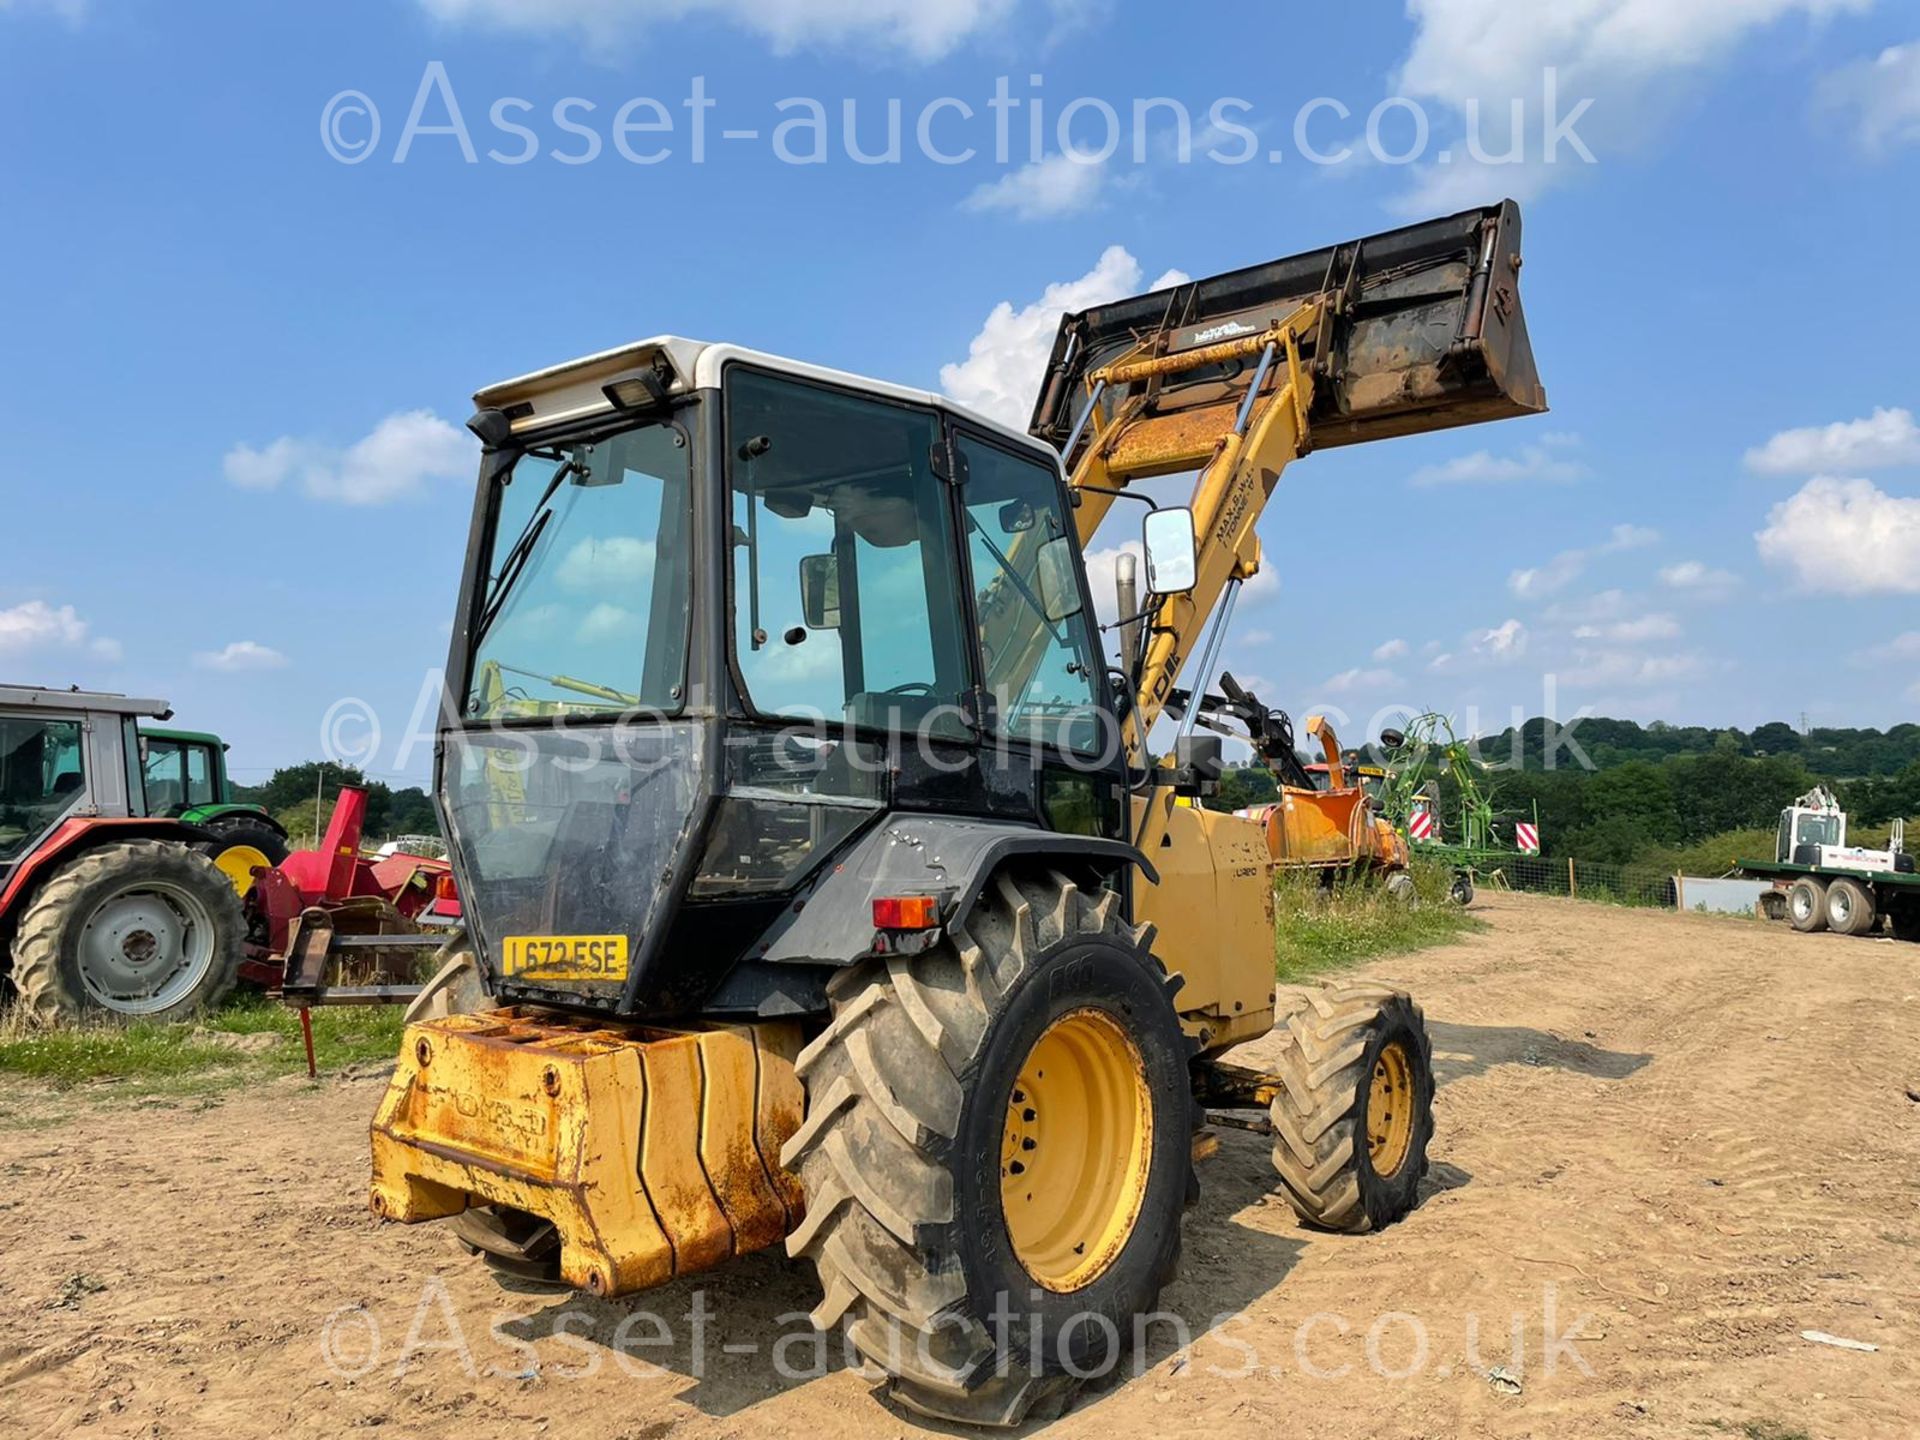 FORD 655D WHEEL DIGGER, RUNS DRIVES AND LIFTS, ROAD REGISTERED, FULLY GLASS CAB *PLUS VAT* - Image 13 of 28